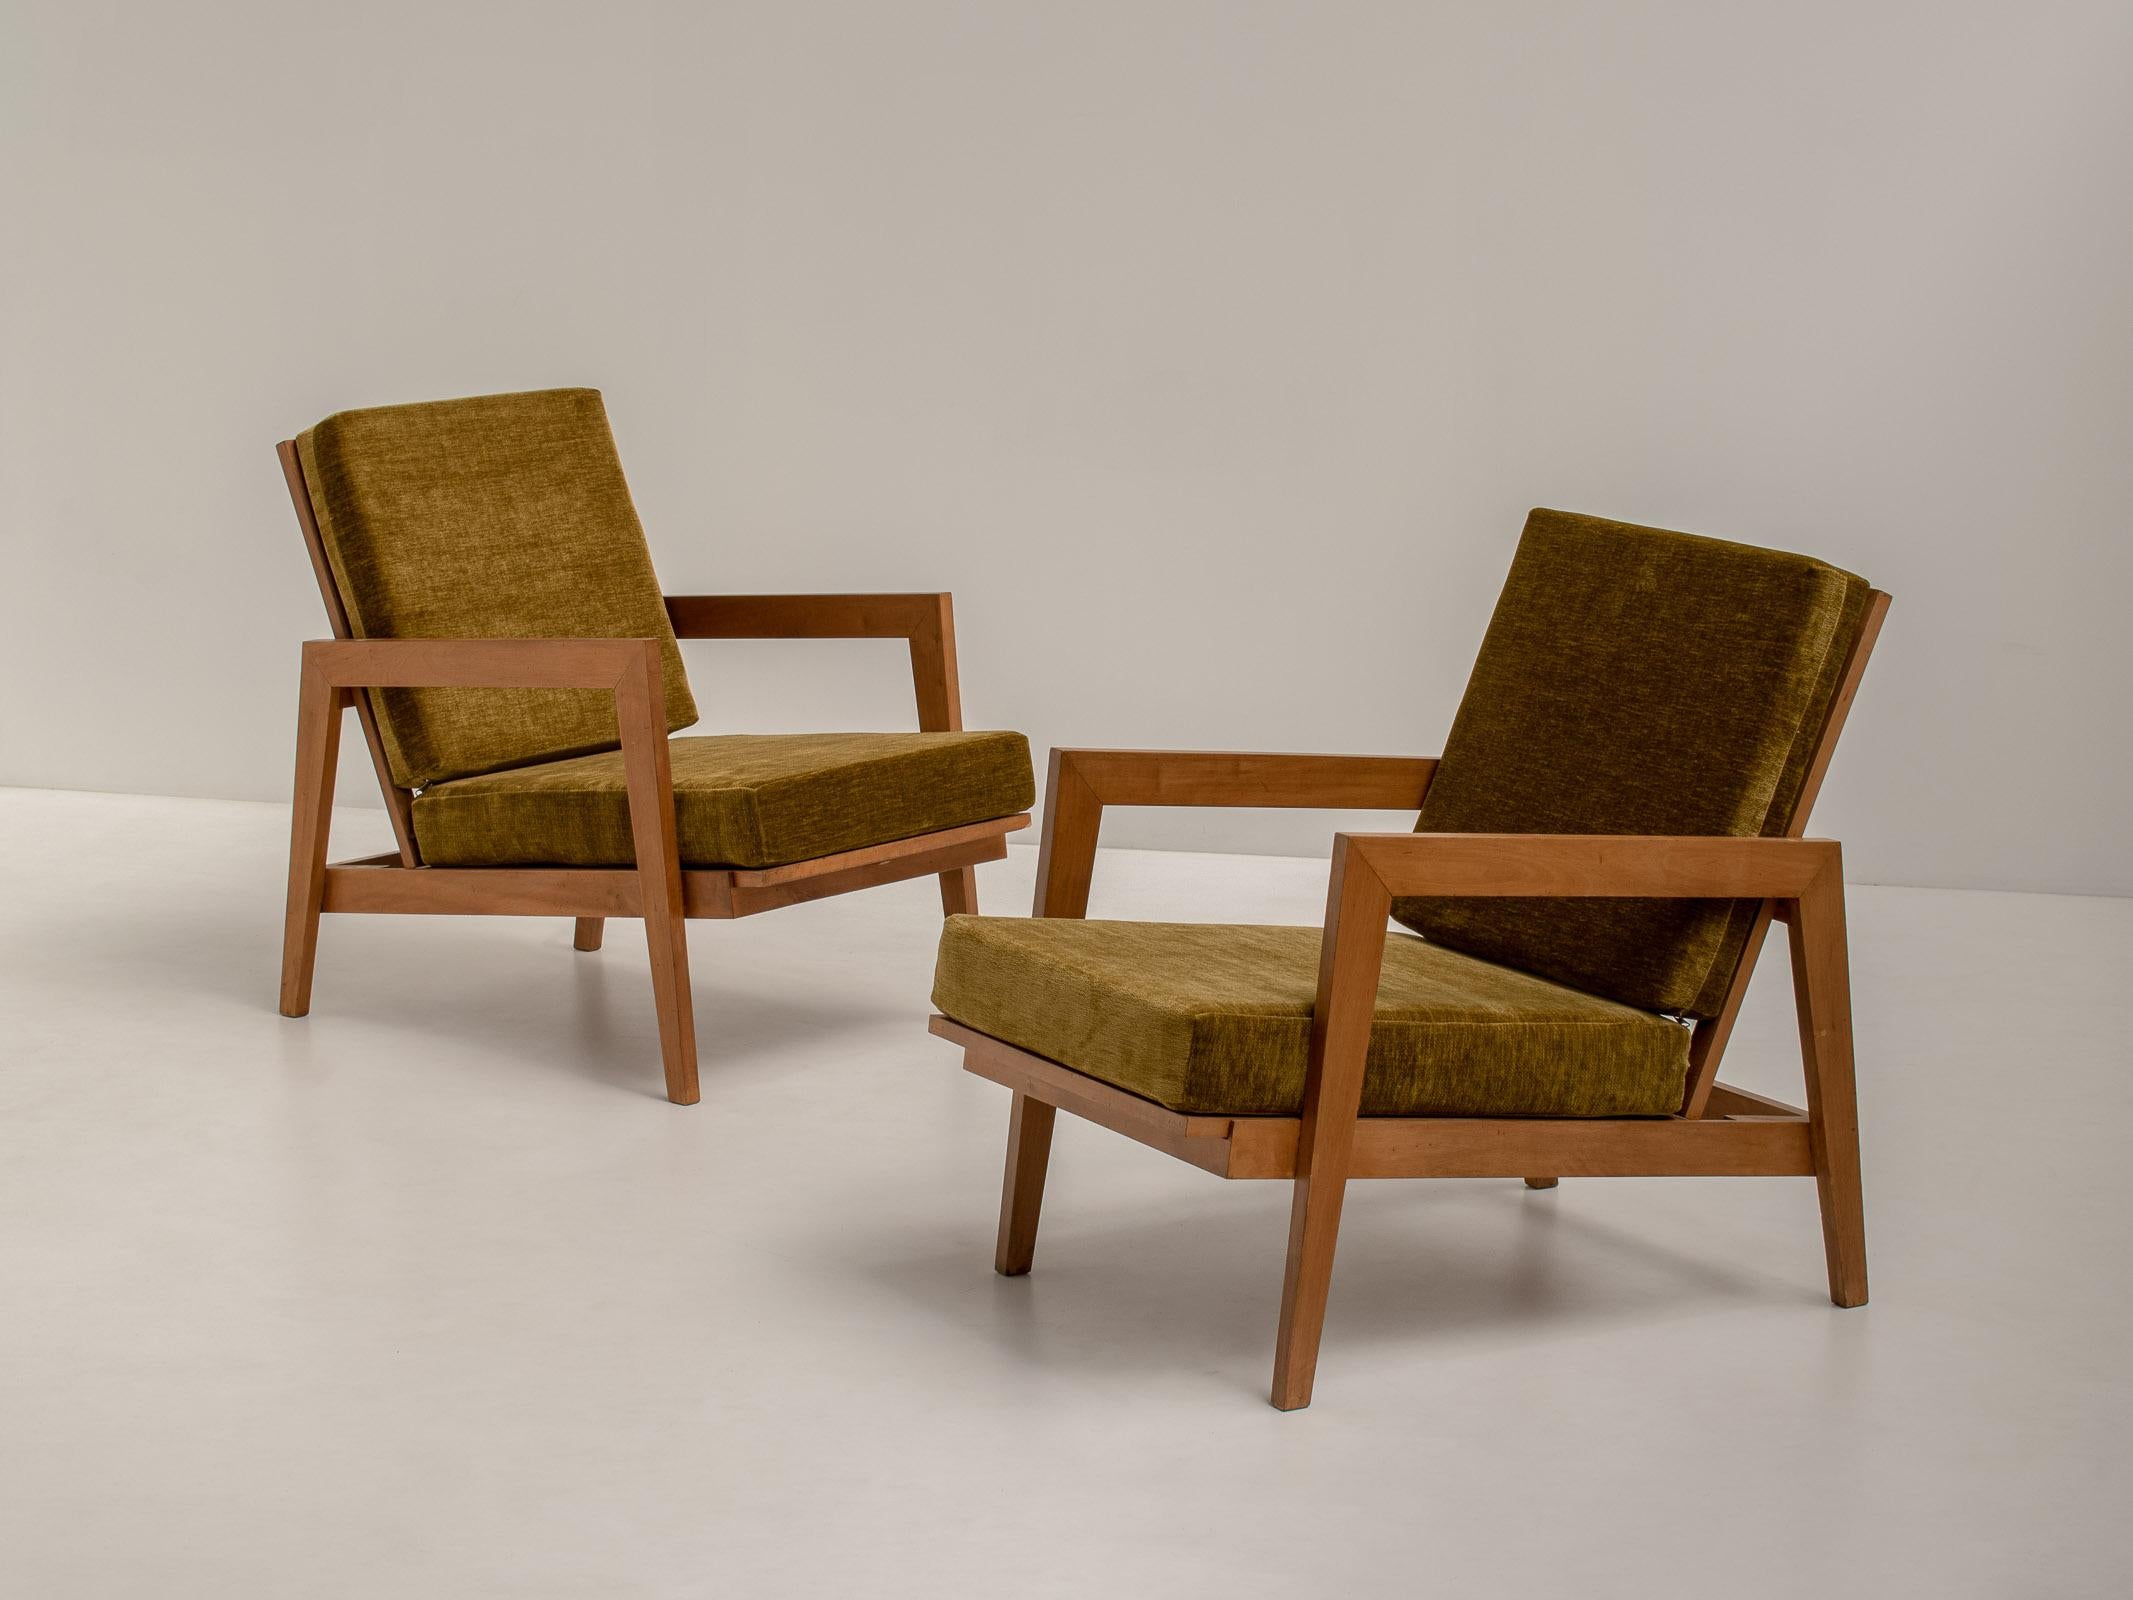 Very elegant pair of mid-century reconstruction chairs that were sourced in the south of France, post-war design.

The design is reminiscent of René Gabriel and is a typical example of the French reconstruction movement; meaning functional